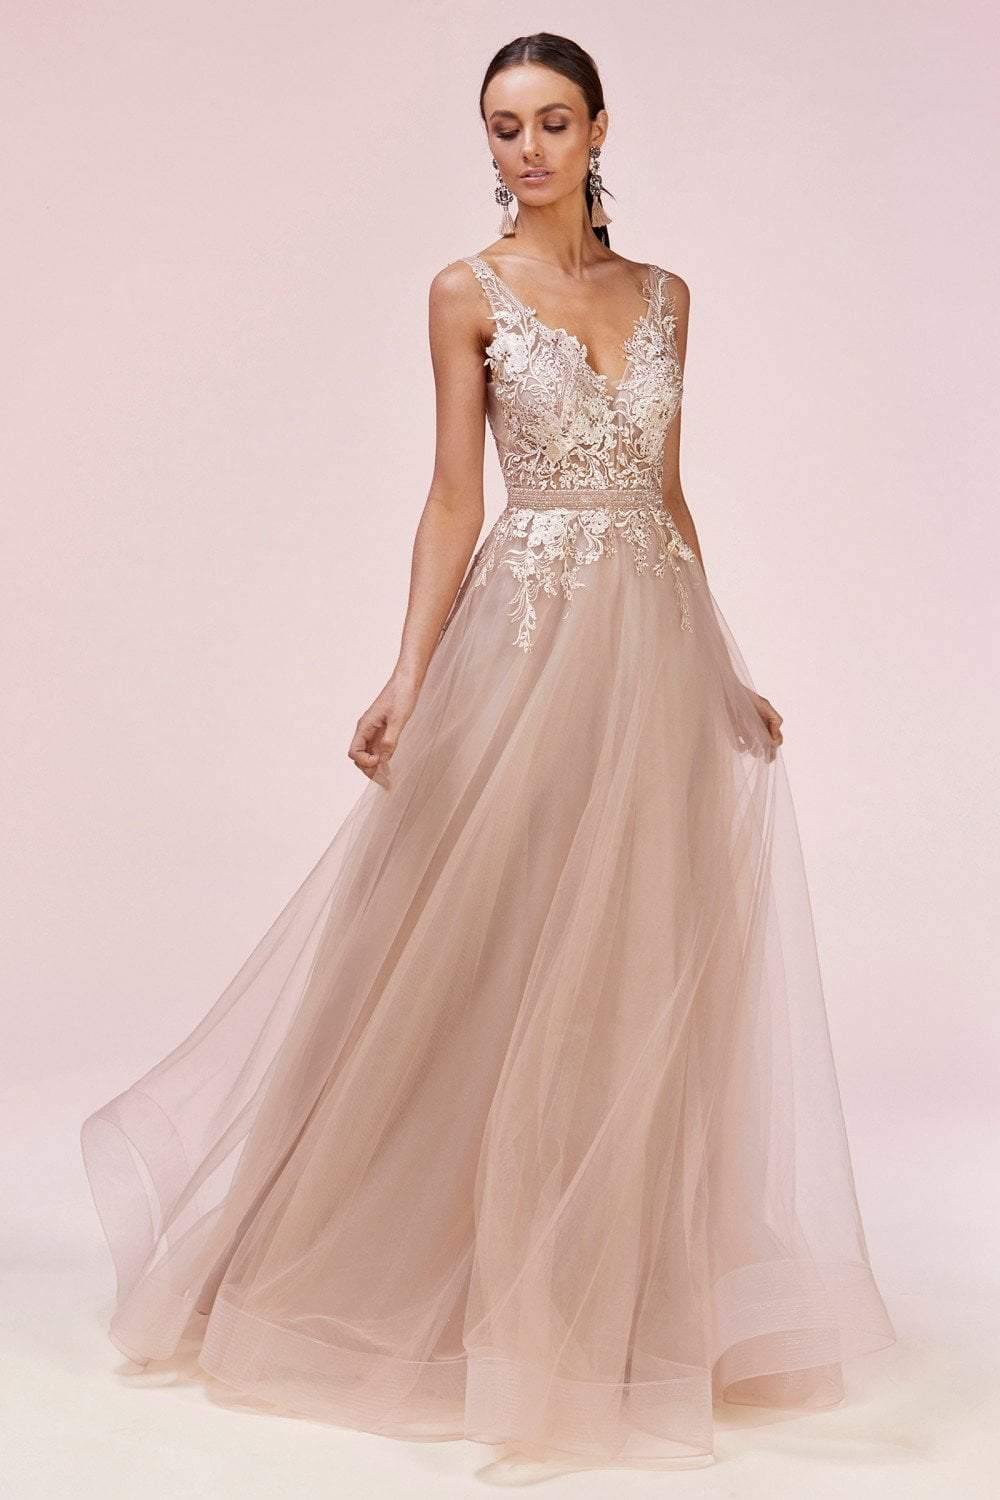 Andrea & Leo CDA0567 Prom Long Dress Evening Gown Rose Gold